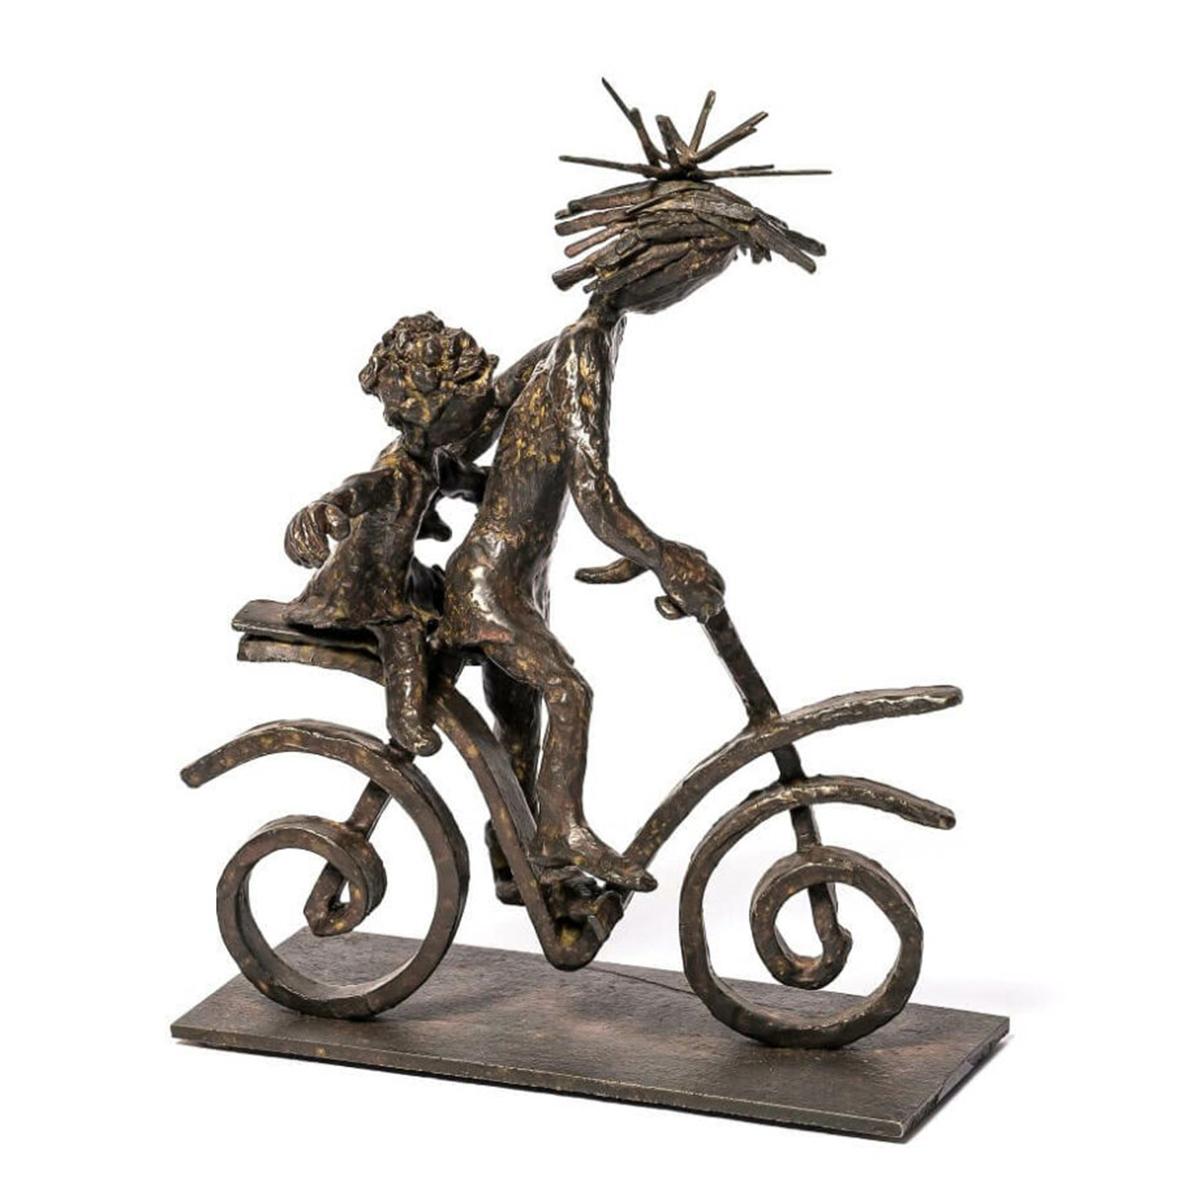 Sculpture Child on Bicycle Bronze all in solid
bronze in brown finish, on solid bronze base.